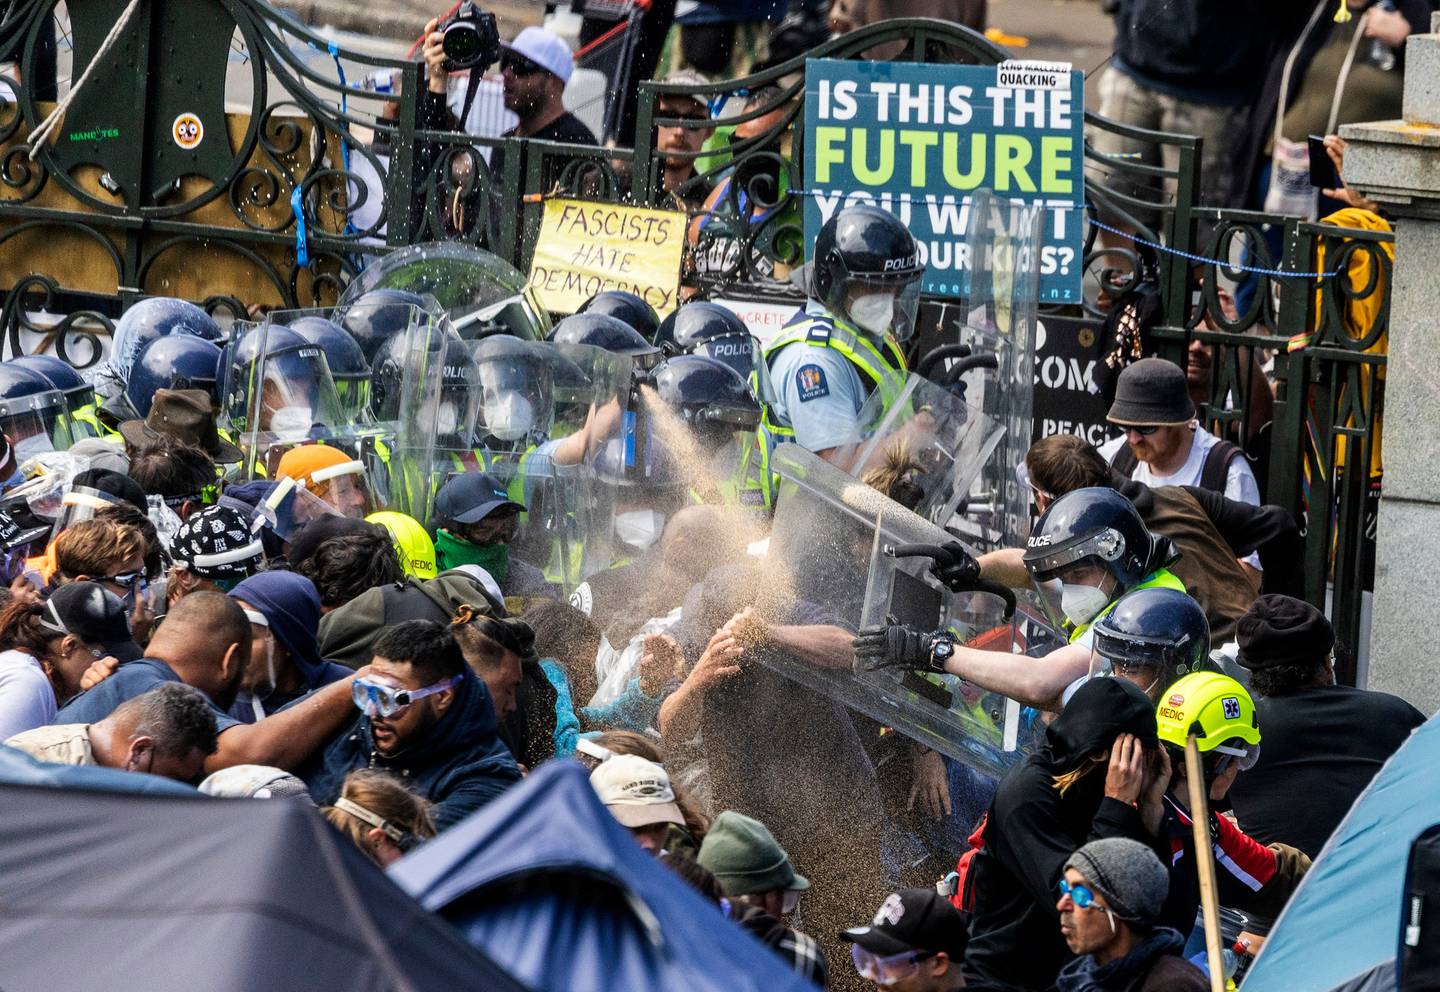 Police clash with protesters while clearing Parliament grounds. Photo: Mike Scott